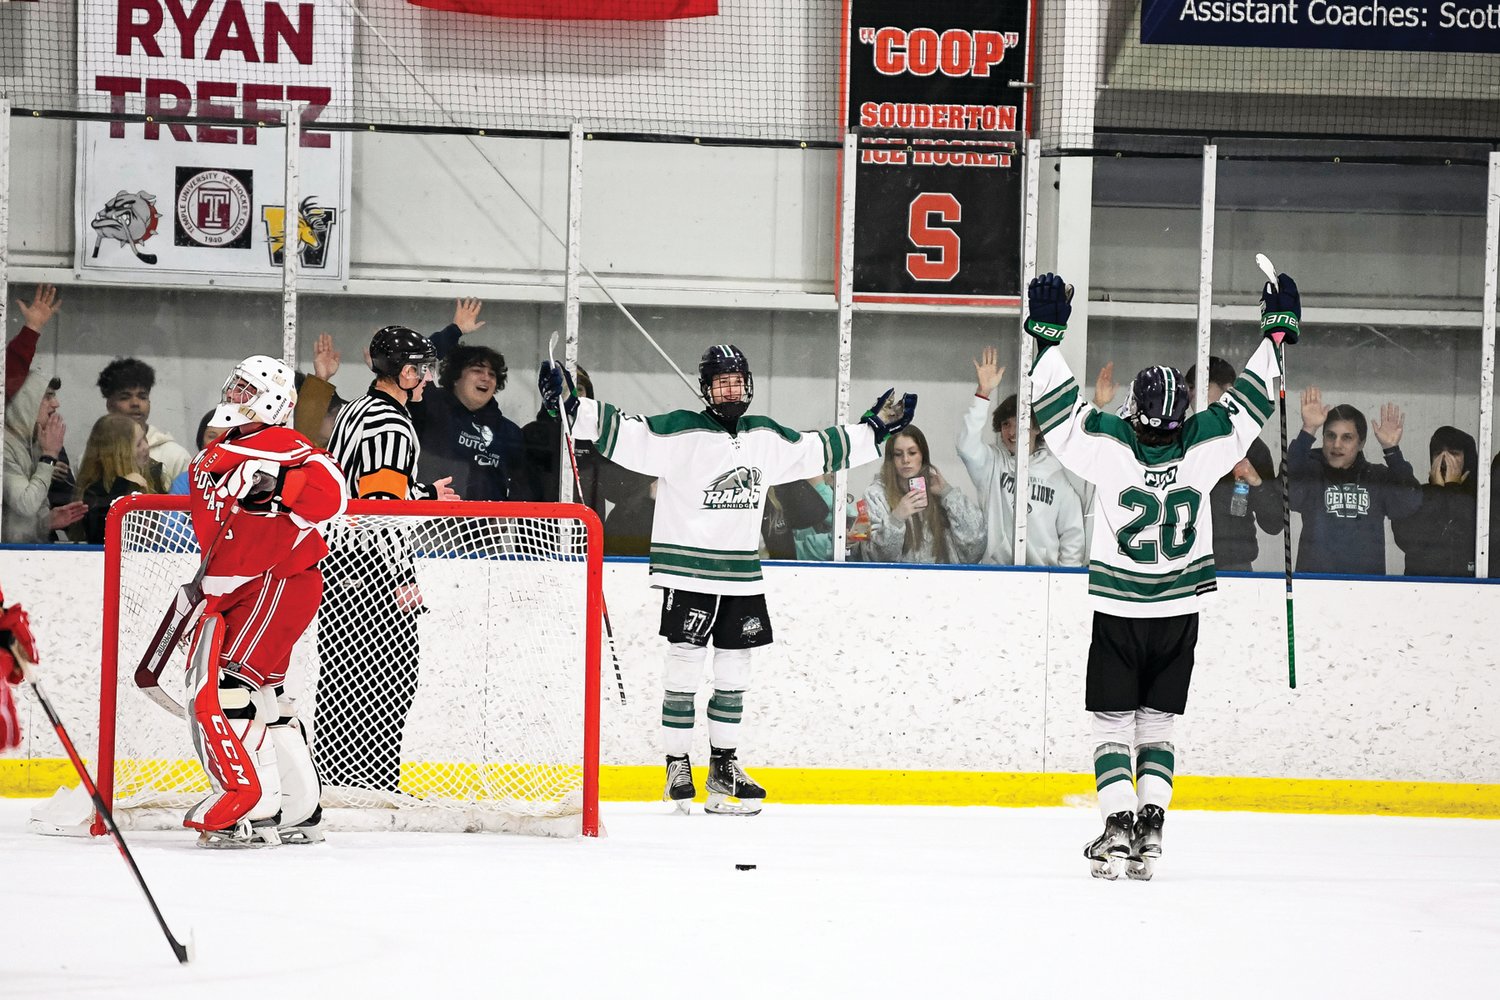 Pennridge’s Shane Dachowski, center, celebrates after scoring the second of three goals, putting Pennridge up 5-0 in the second period.